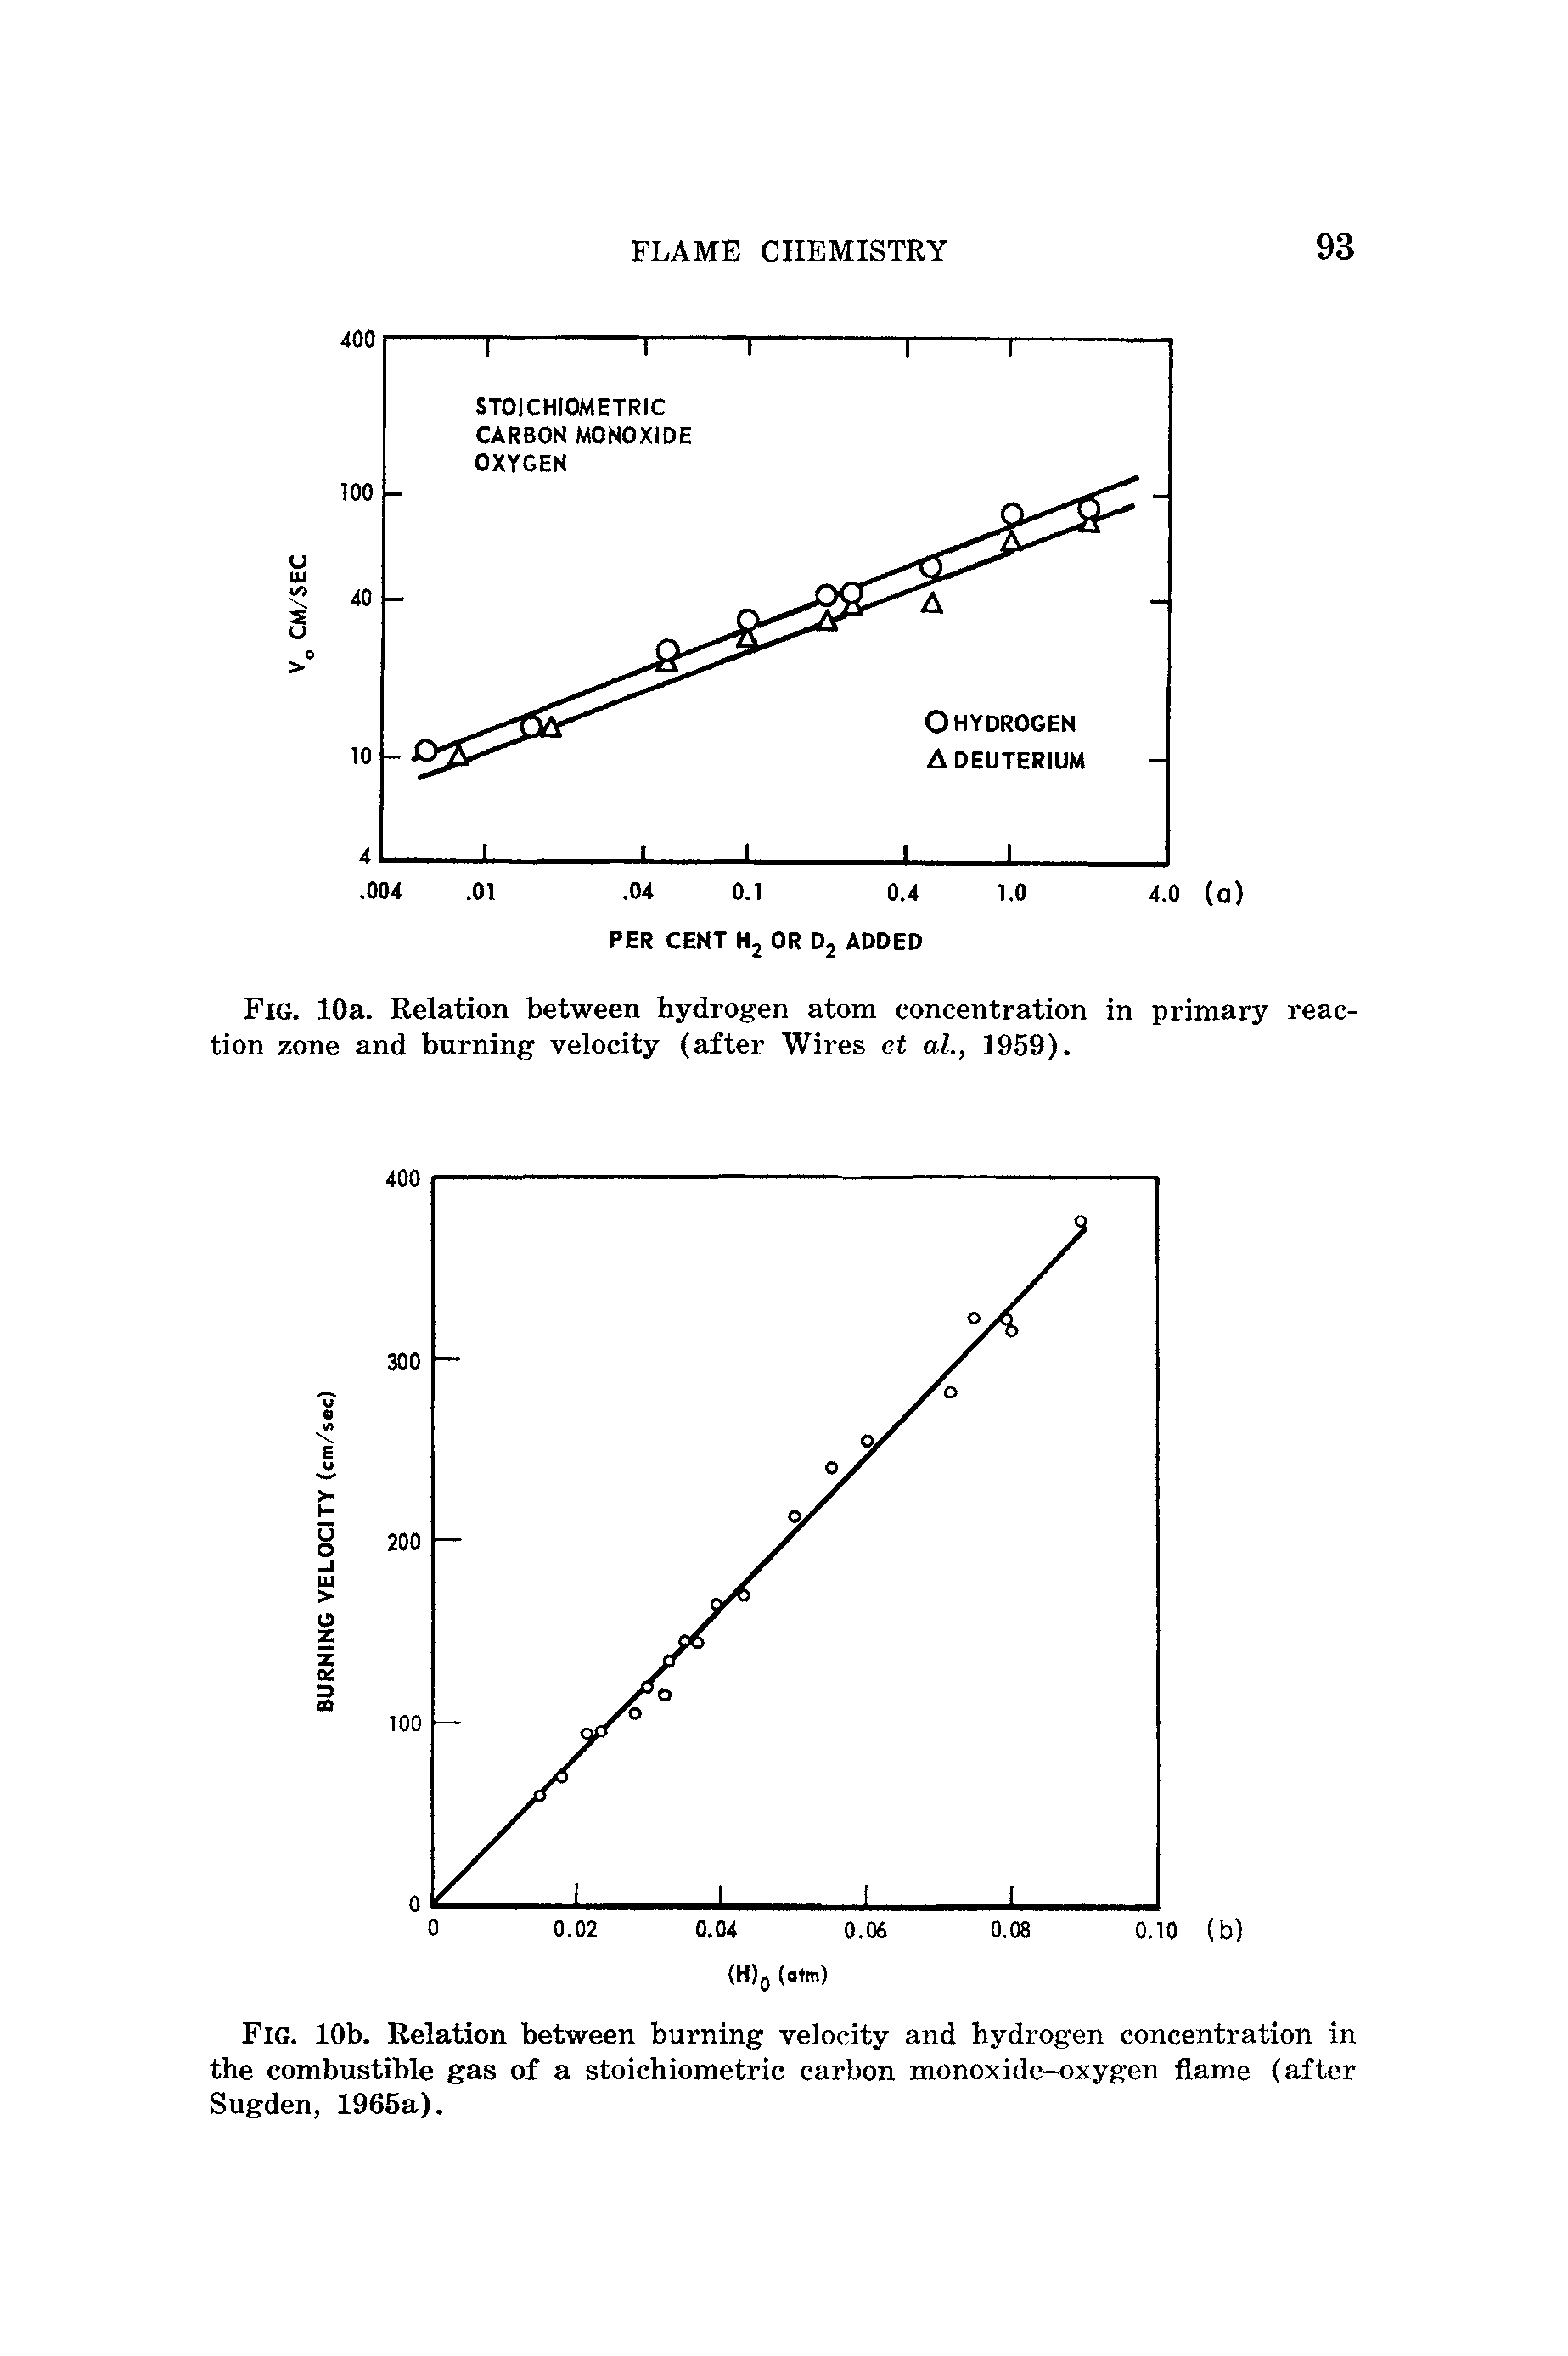 Fig. 10b. Relation between burning velocity and hydrogen concentration in the combustible gas of a stoichiometric carbon monoxide-oxygen flame (after Sugden, 1965a).